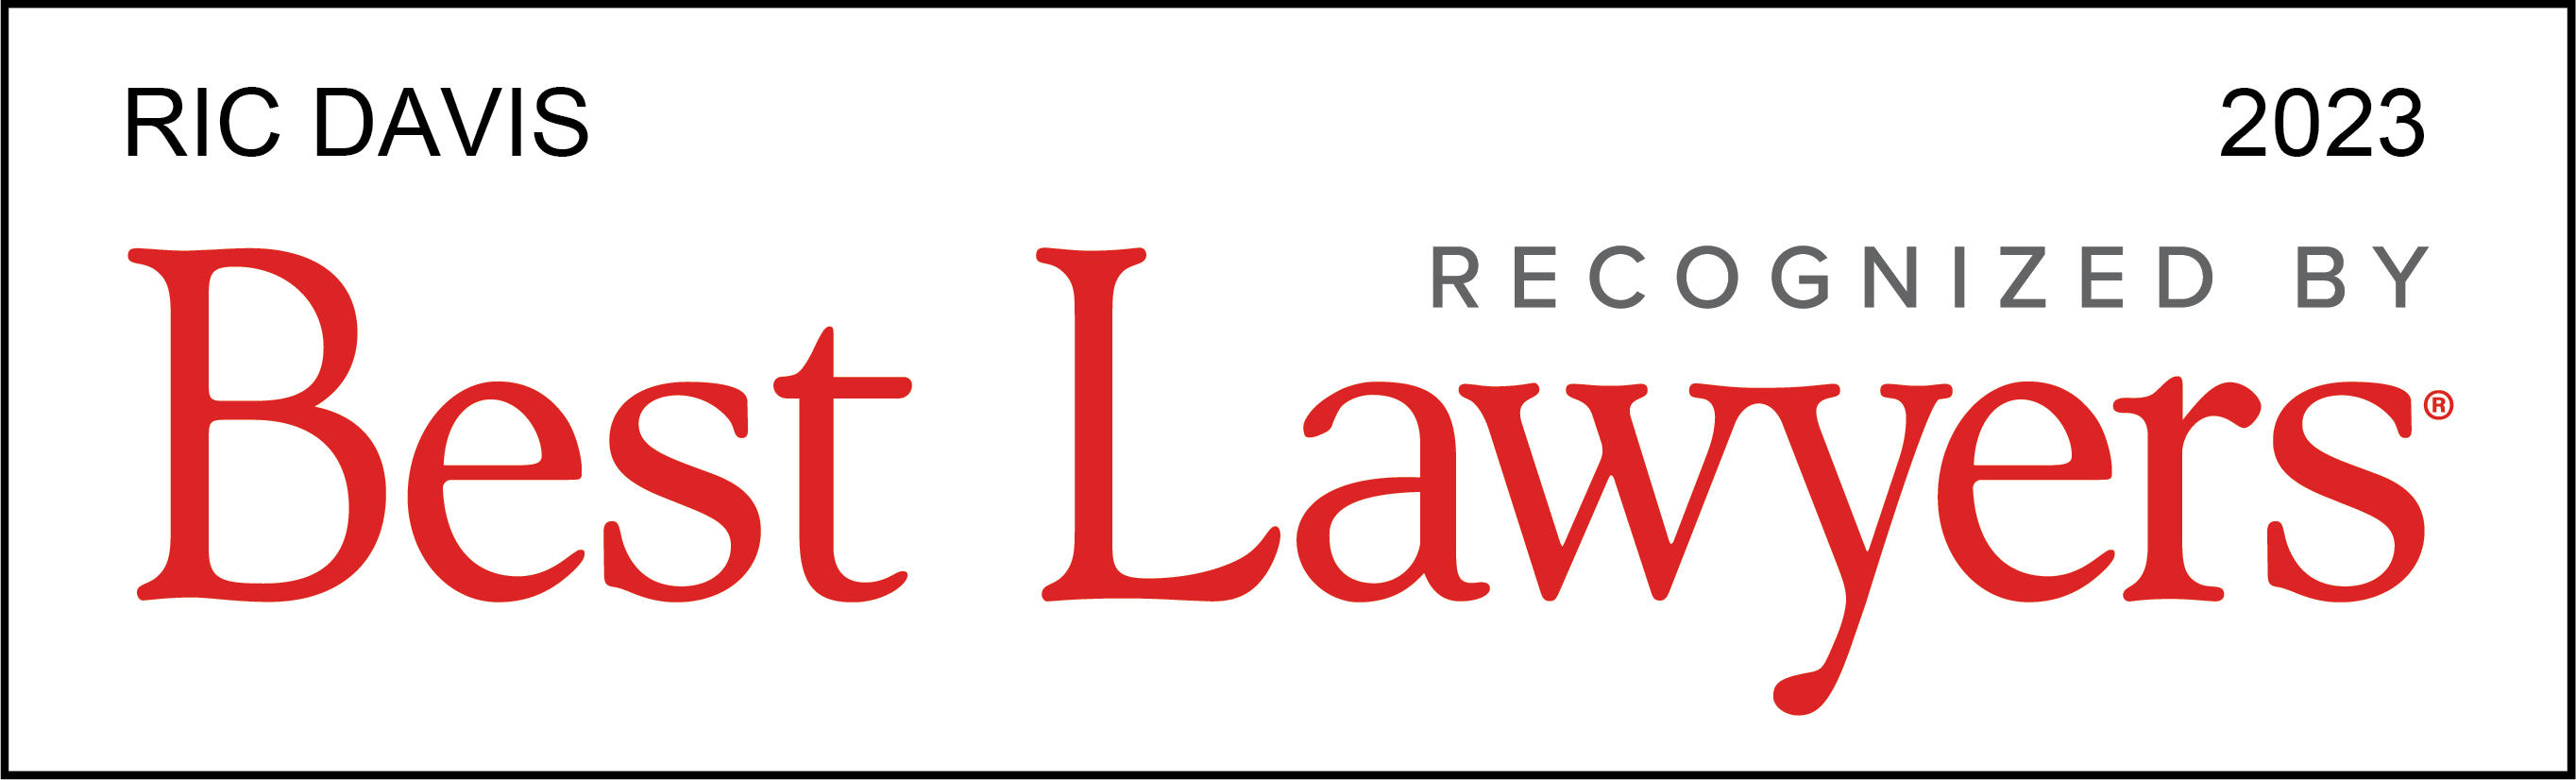 Ric Davis Recognized by Best Lawyers